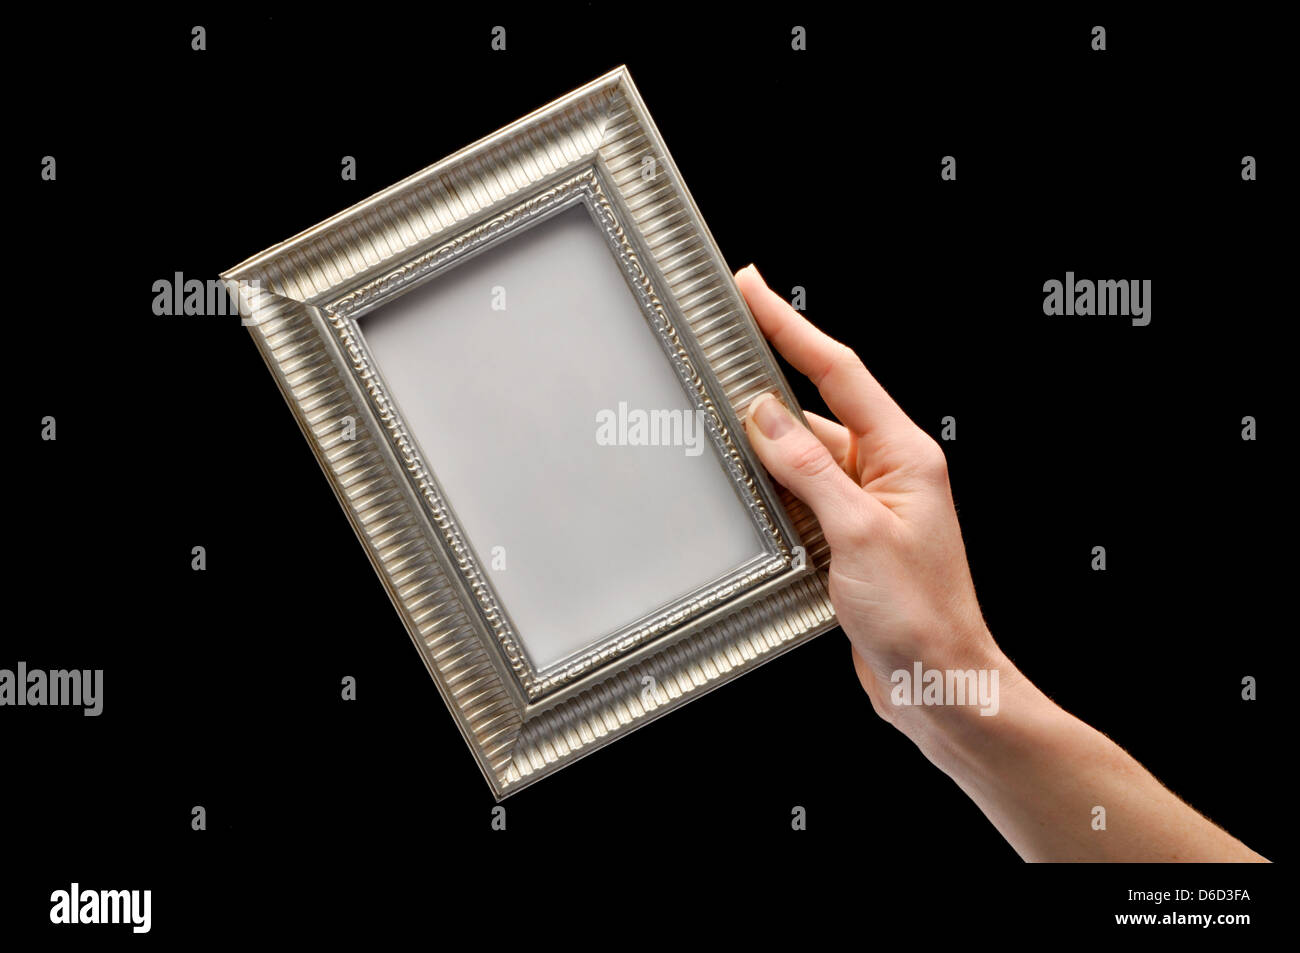 hand holding empthy picture frame Stock Photo